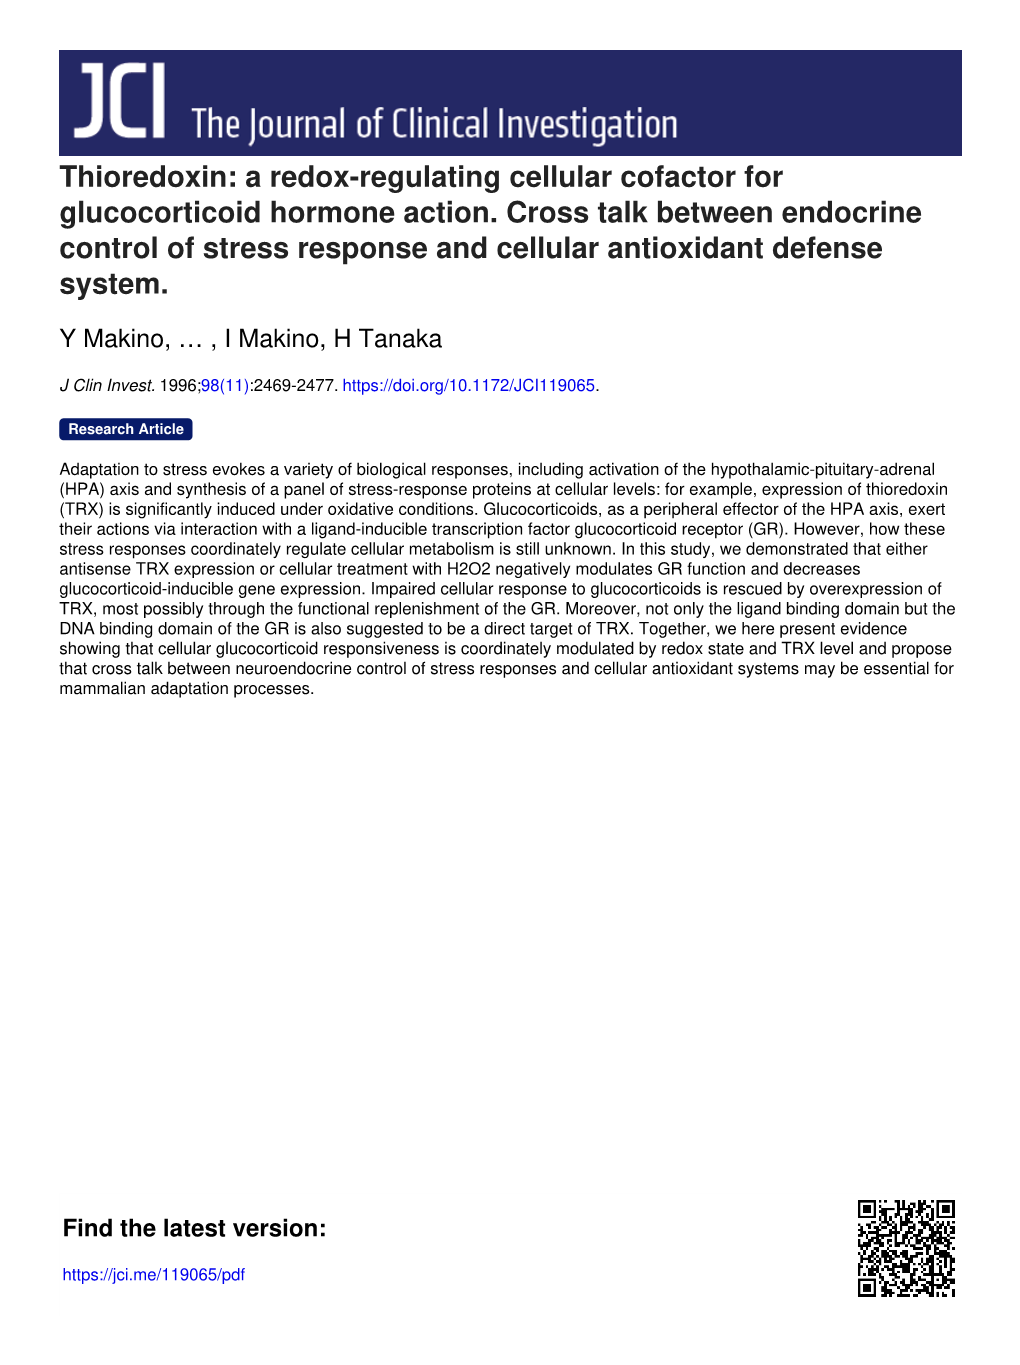 Thioredoxin: a Redox-Regulating Cellular Cofactor for Glucocorticoid Hormone Action